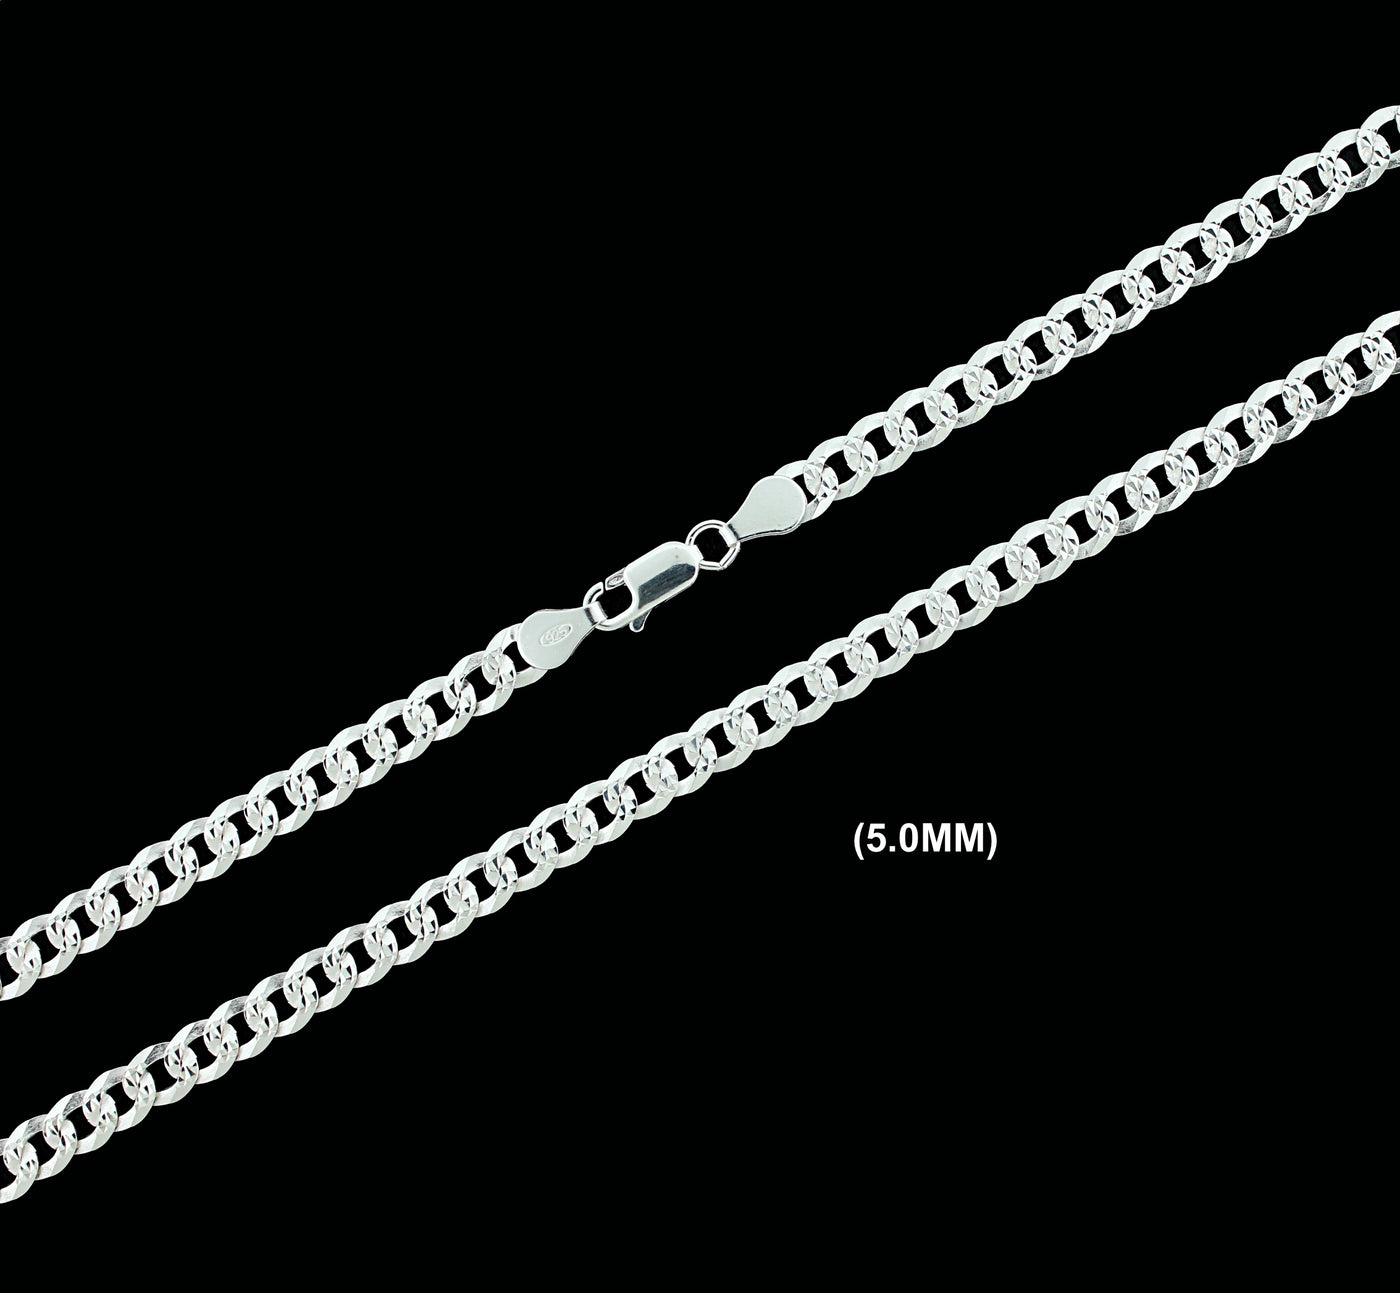 5MM Solid 925 Sterling Silver Diamond Cut Cuban Curb Chain Necklace or Bracelet ITALY